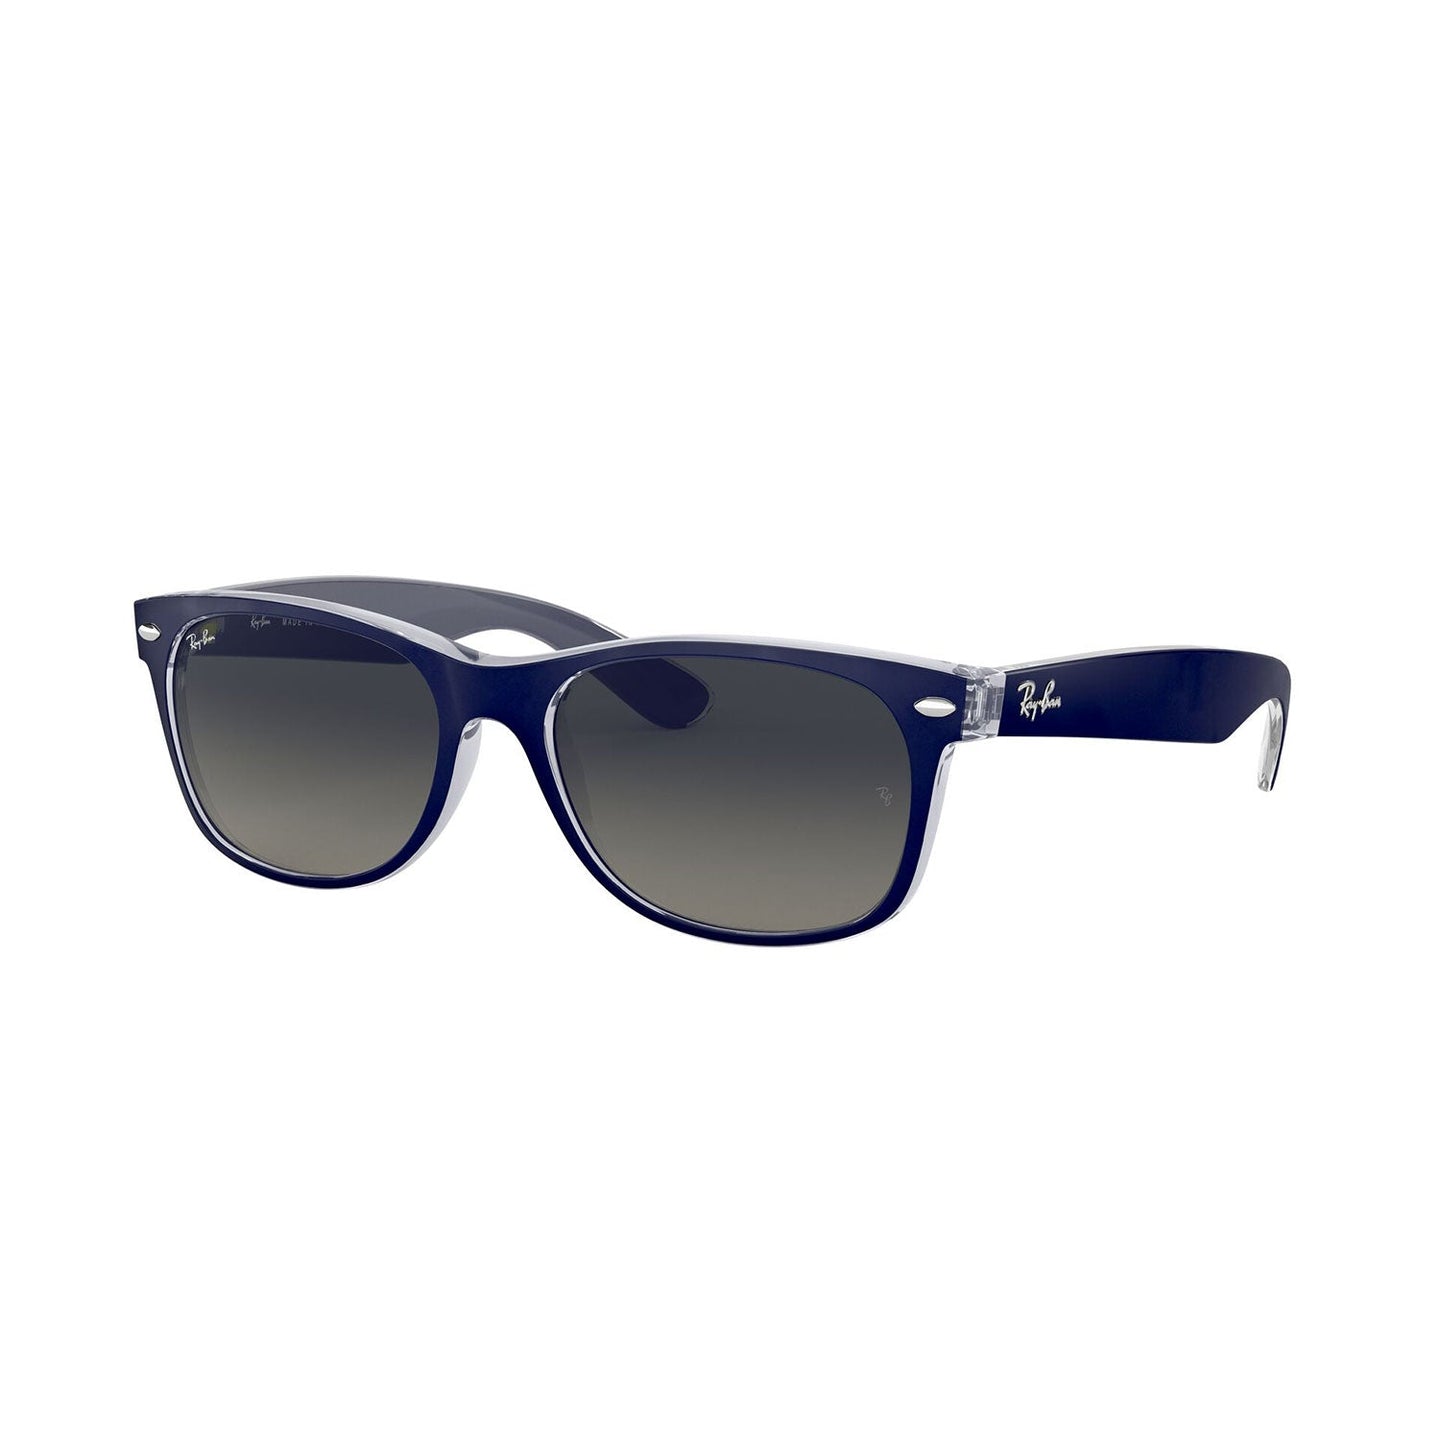 sunglasses ray ban model rb 2132 color 605371 blue